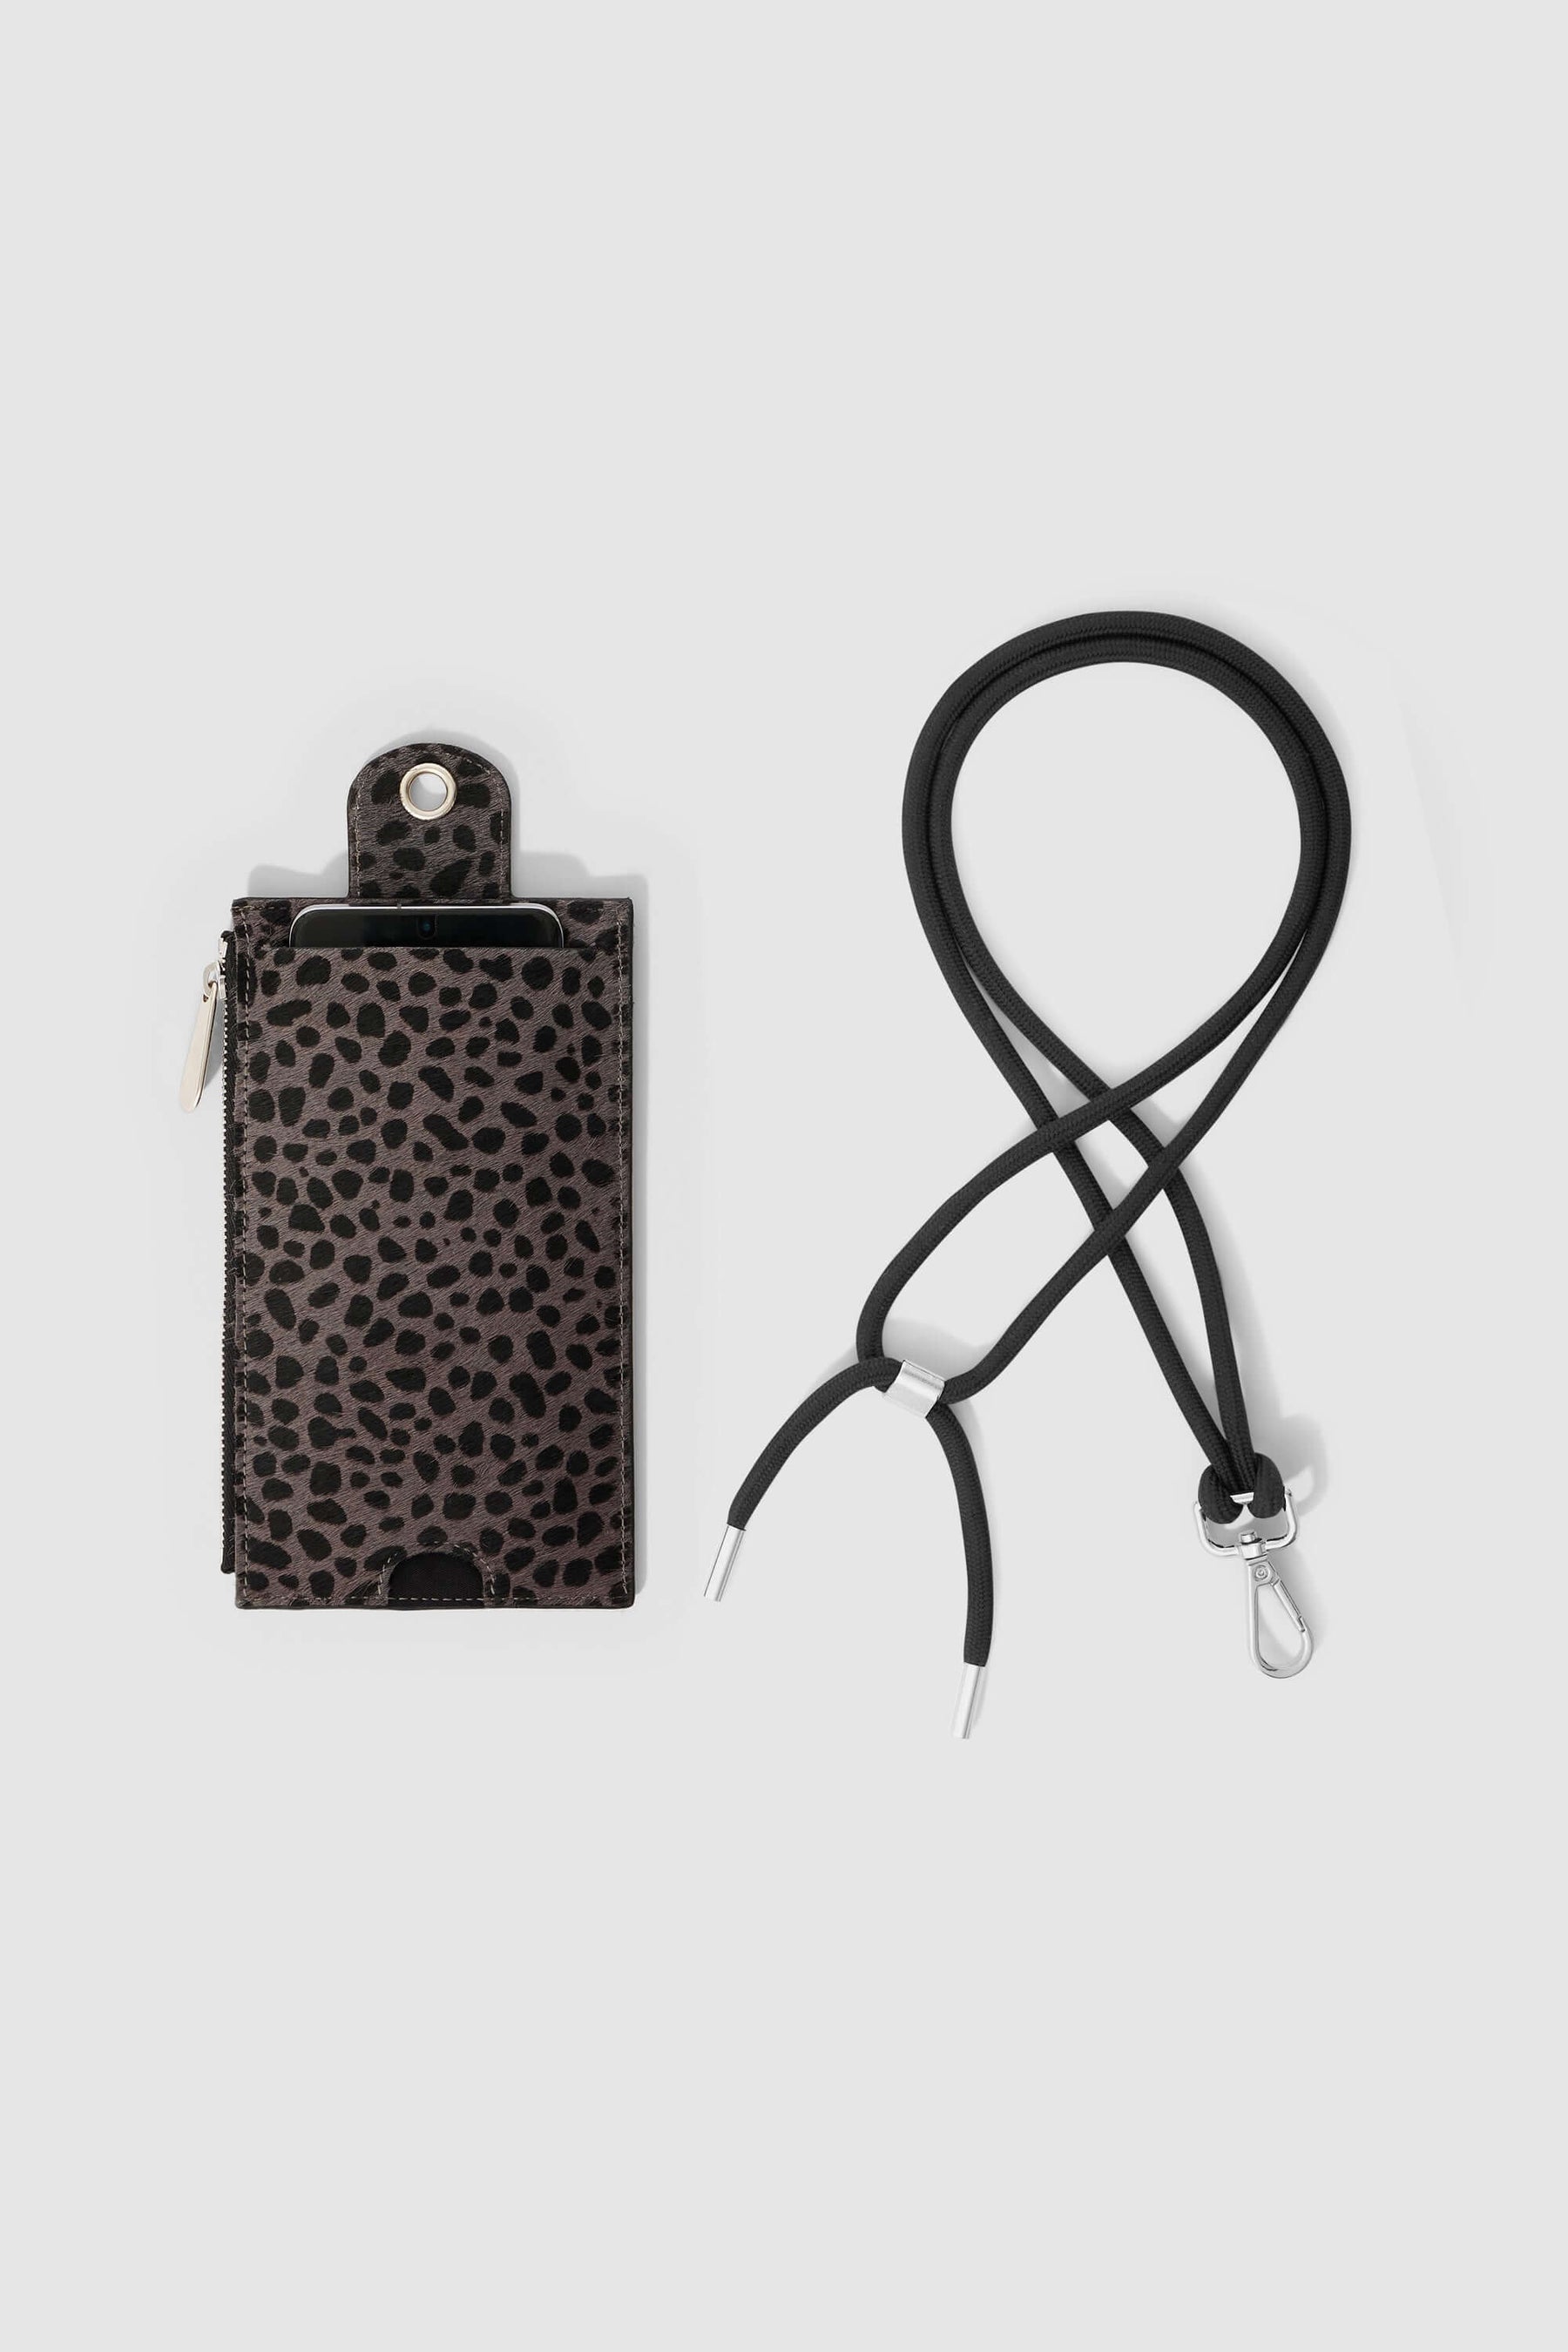 The Minis - Large neck wallet in grey Cheetah printed leather